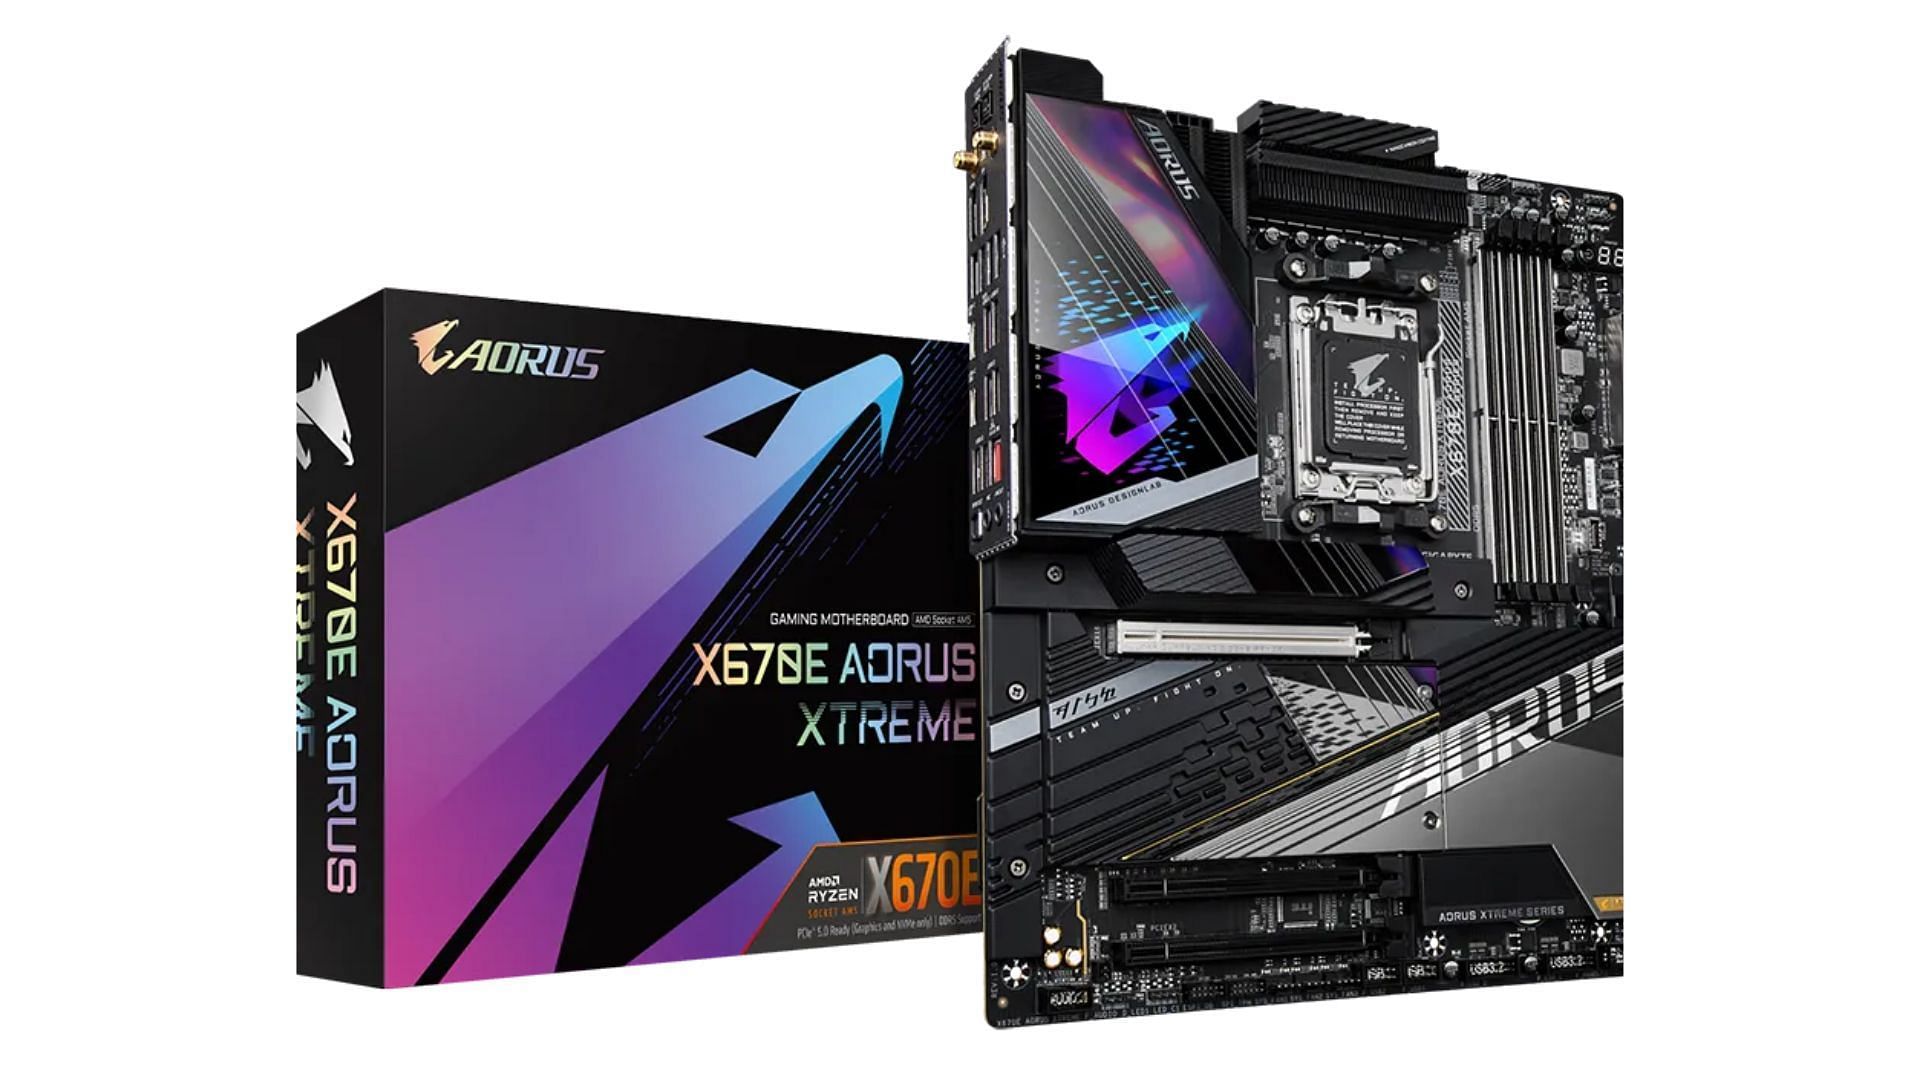 The Gigabyte X670E Aorus Xtreme is a high-end X670E motherboard, with sharp looks. (Image via Gigabyte))